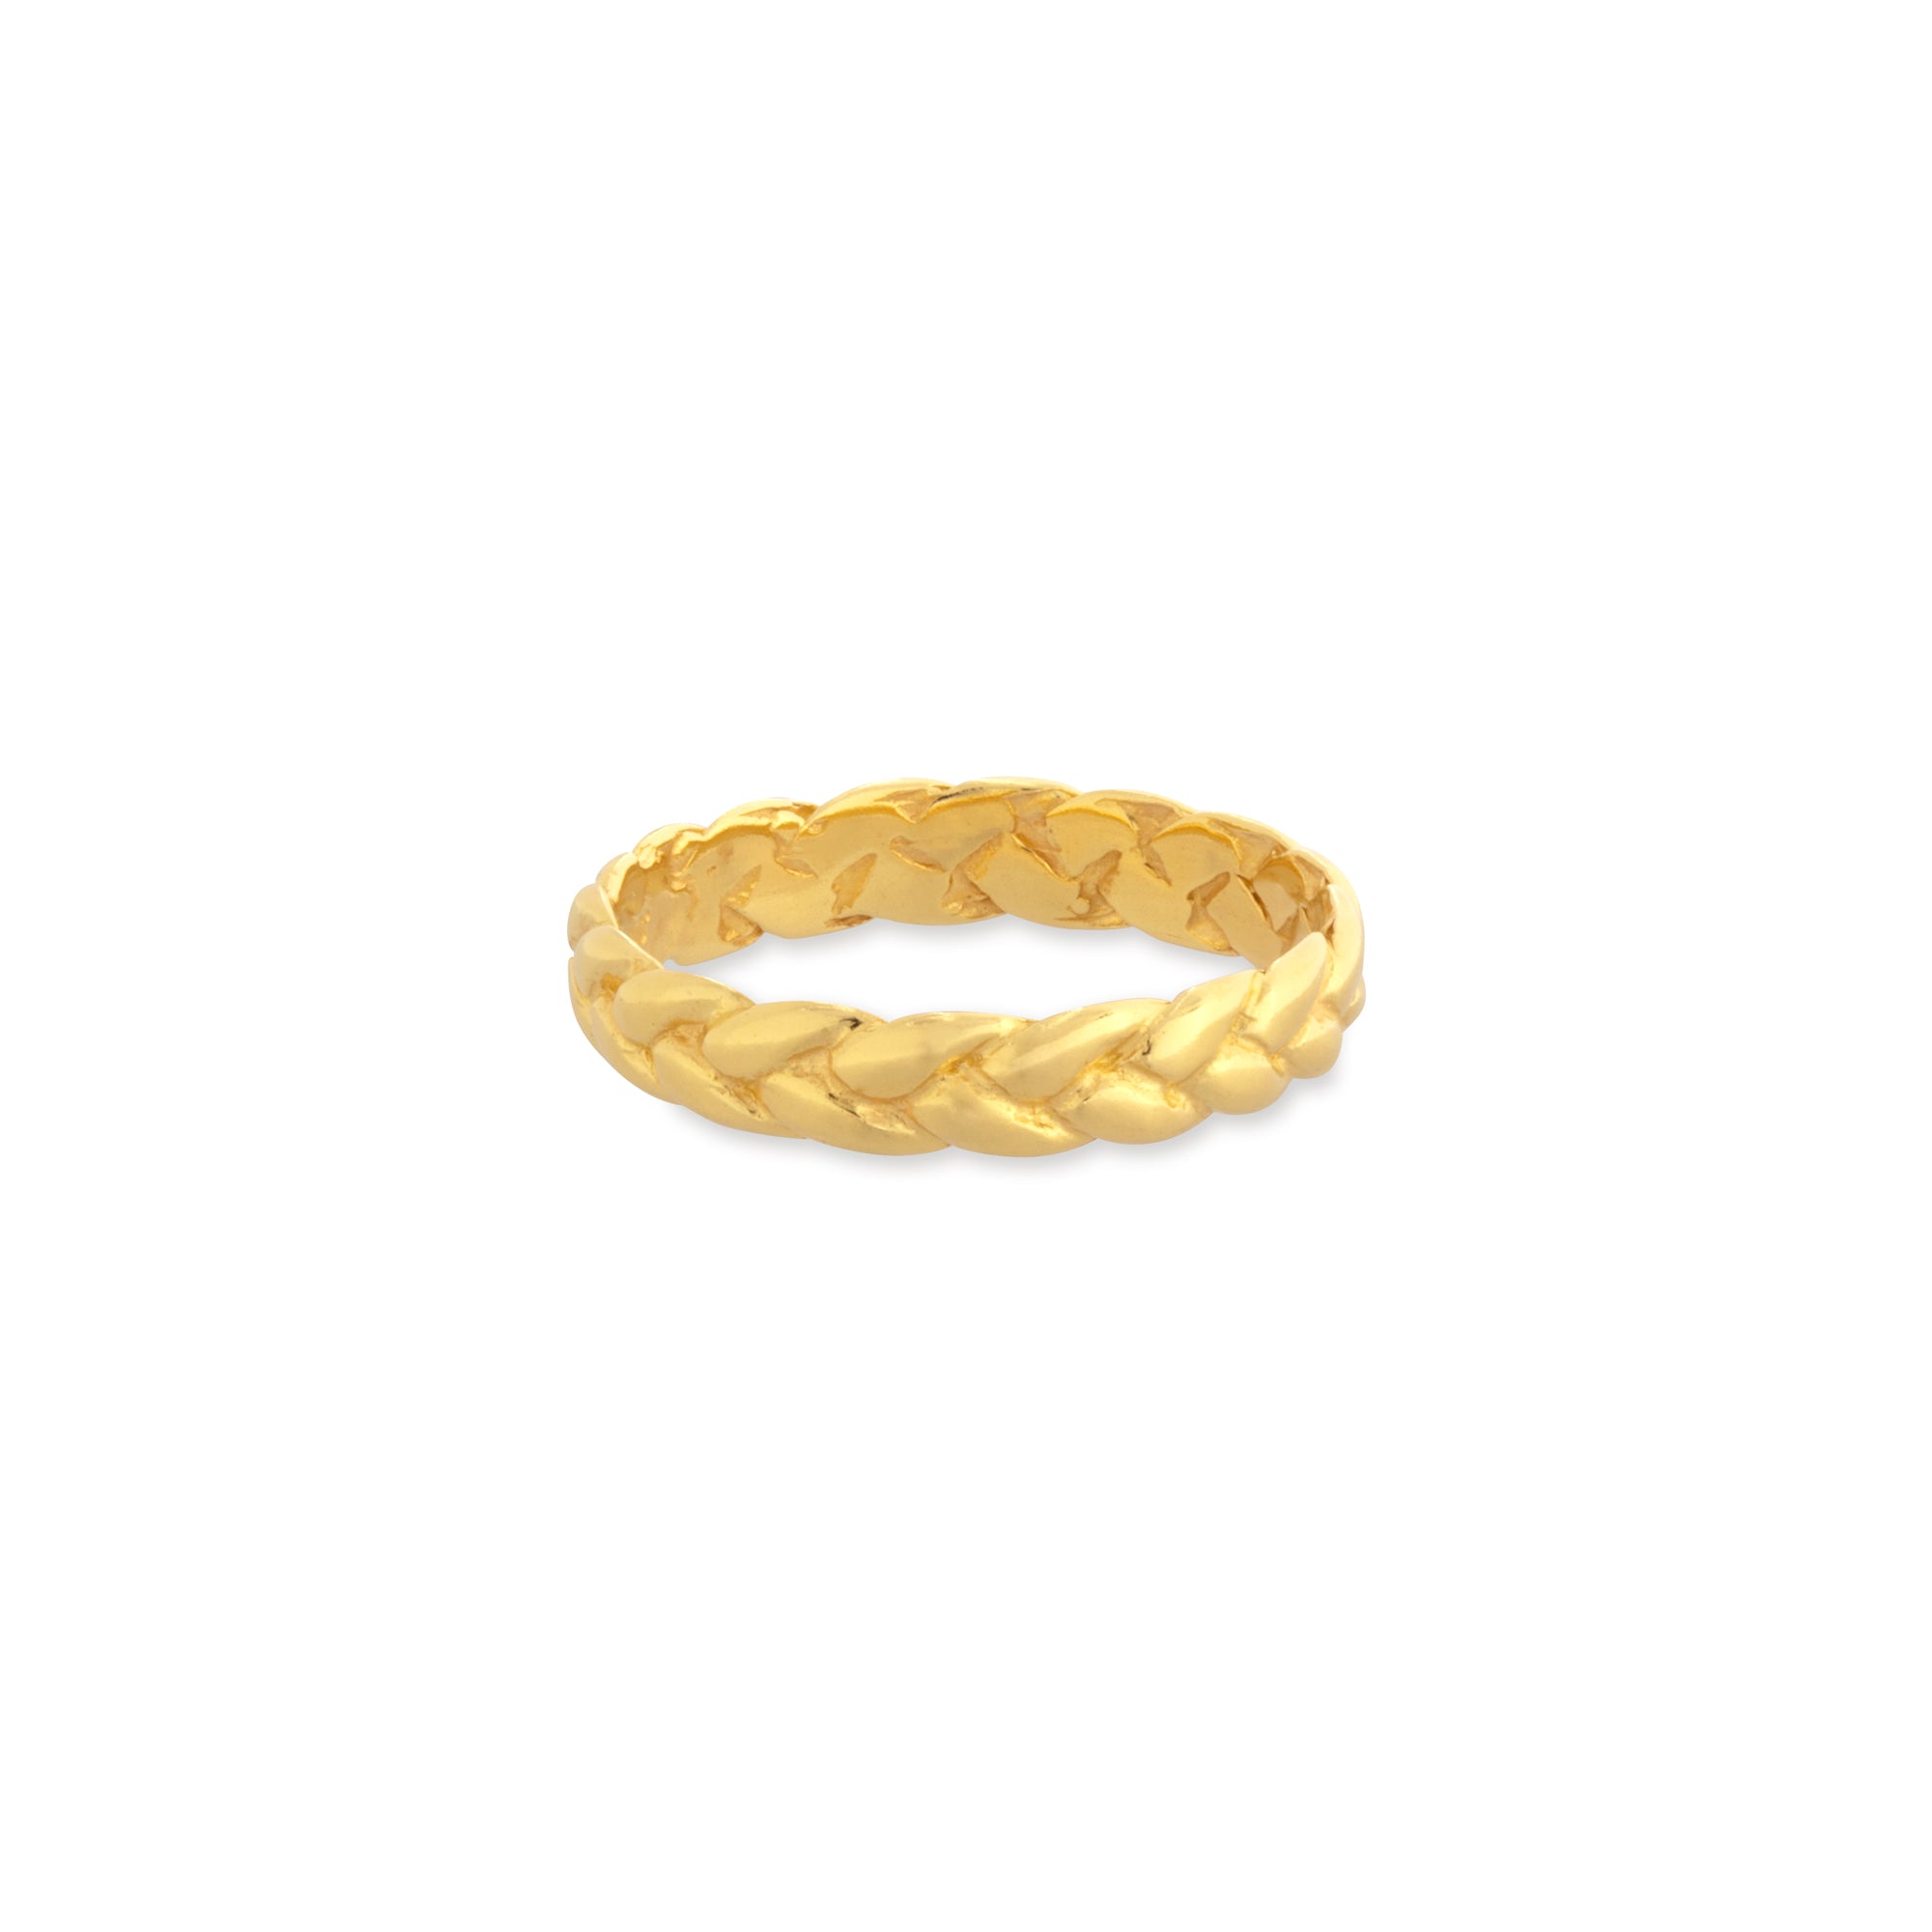 Everyday woven band